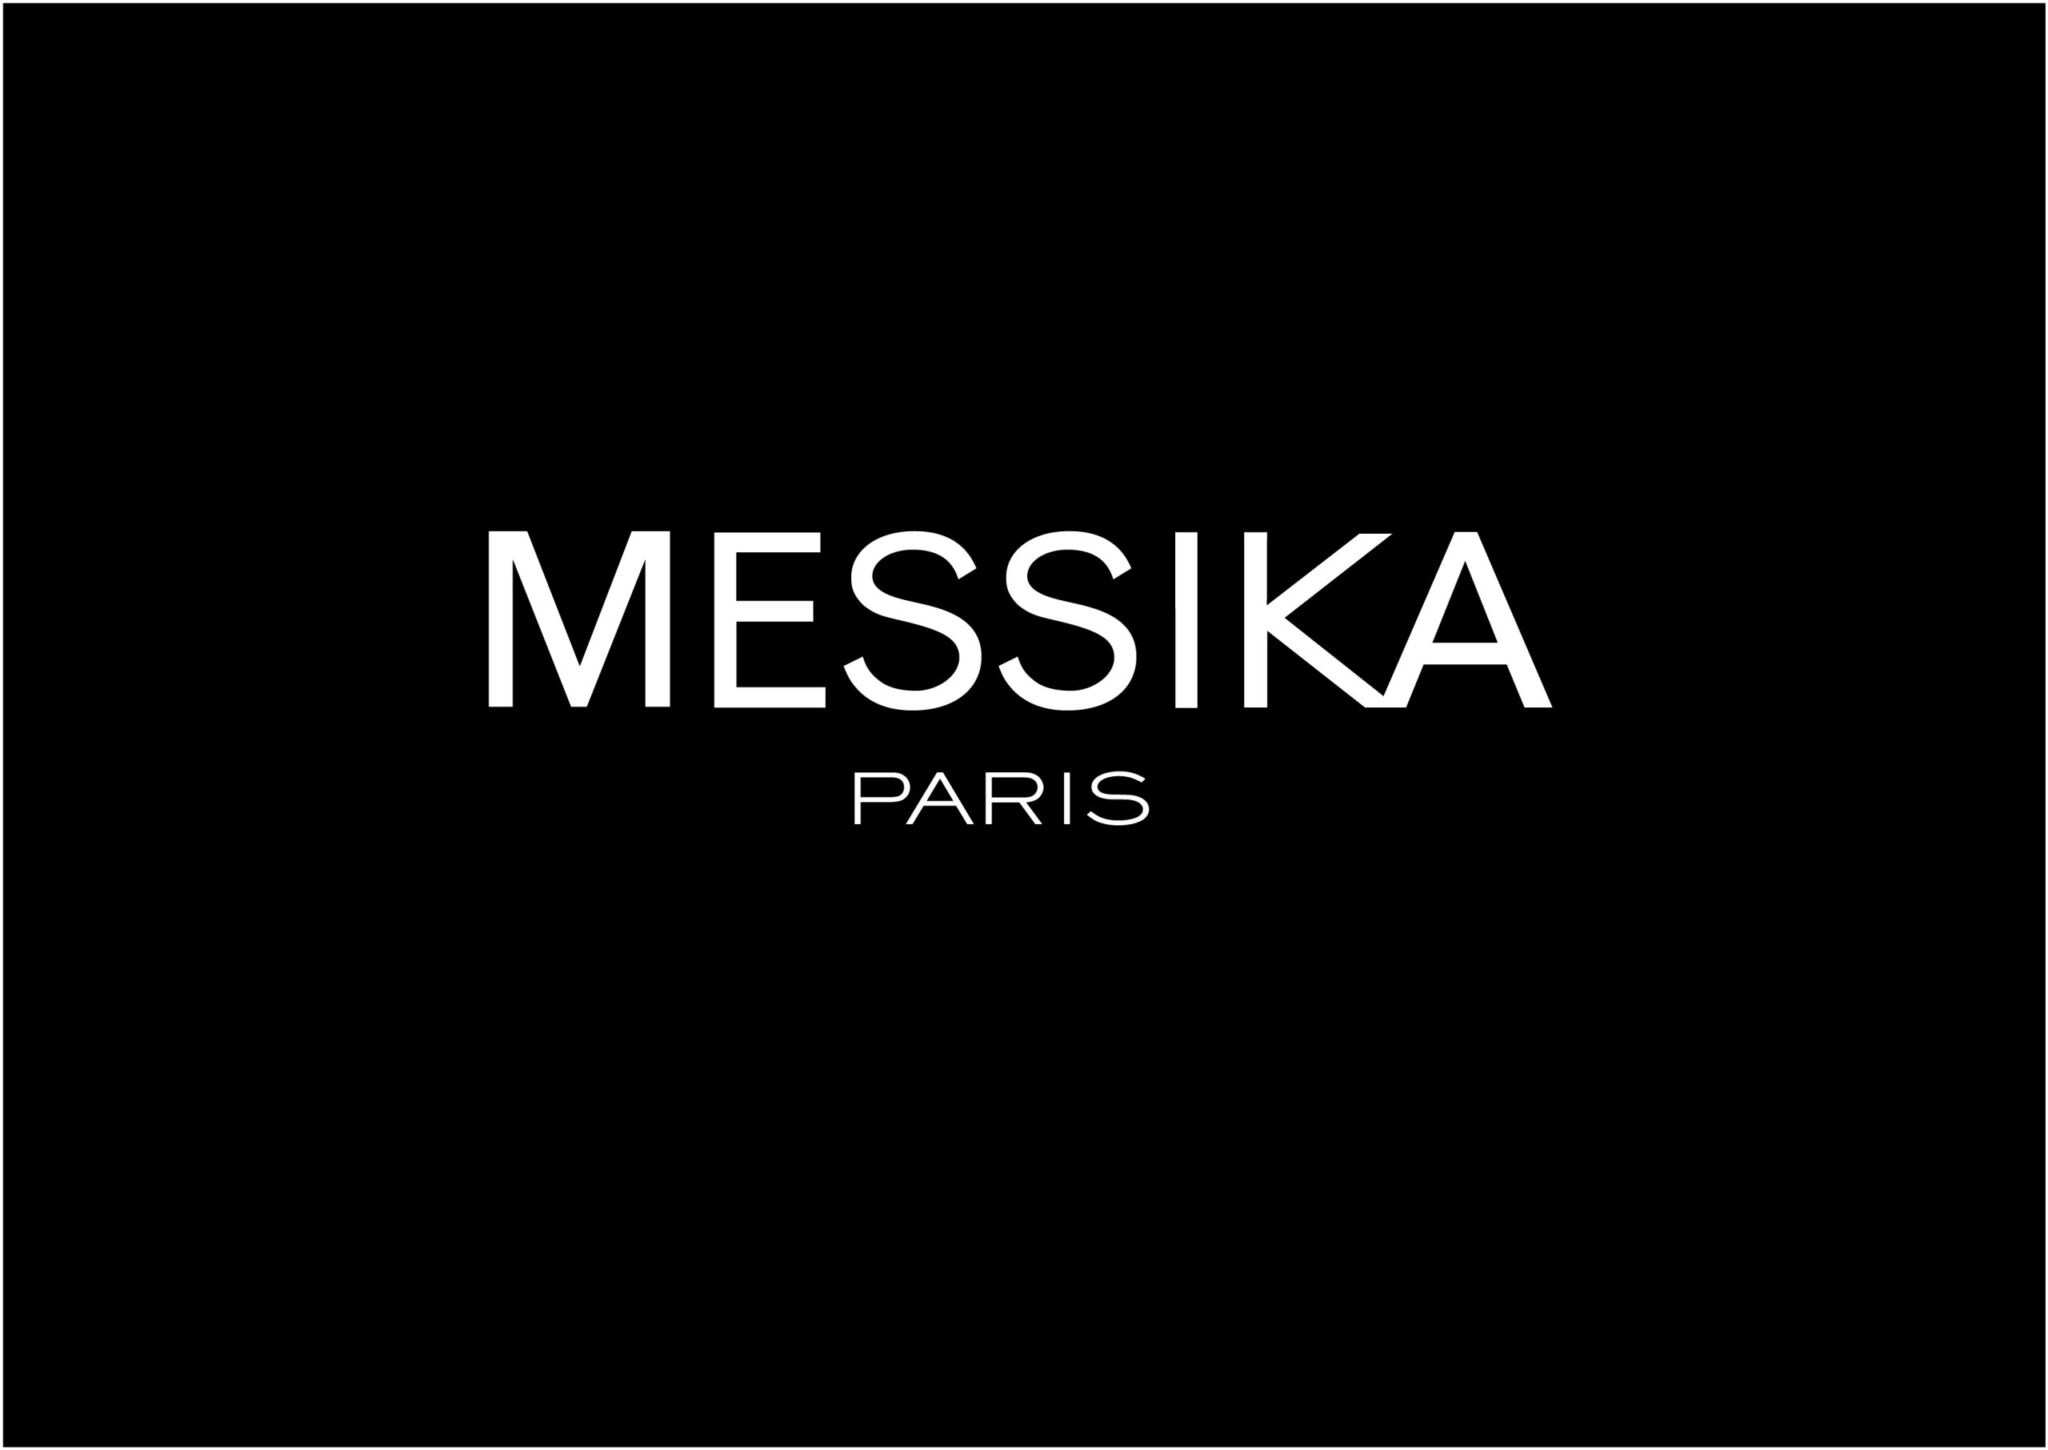 Messika Paris | Breast Cancer Research Foundation